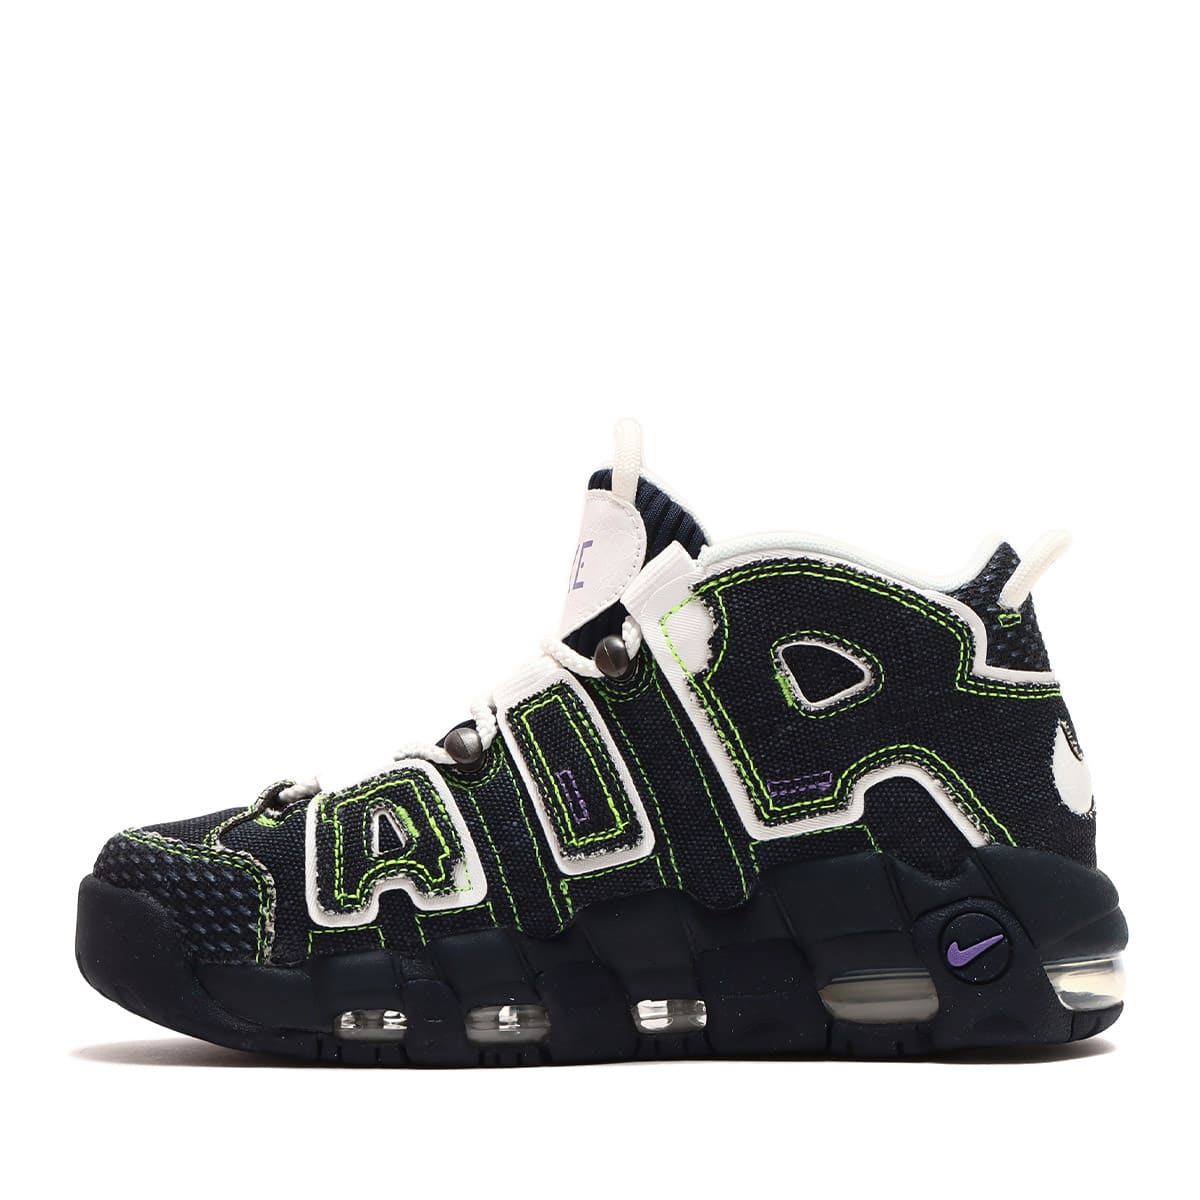 NIKE SWDC W AIR MORE UPTEMPO DARK OBSIDIAN/SUMMIT WHITE-SPACE ...